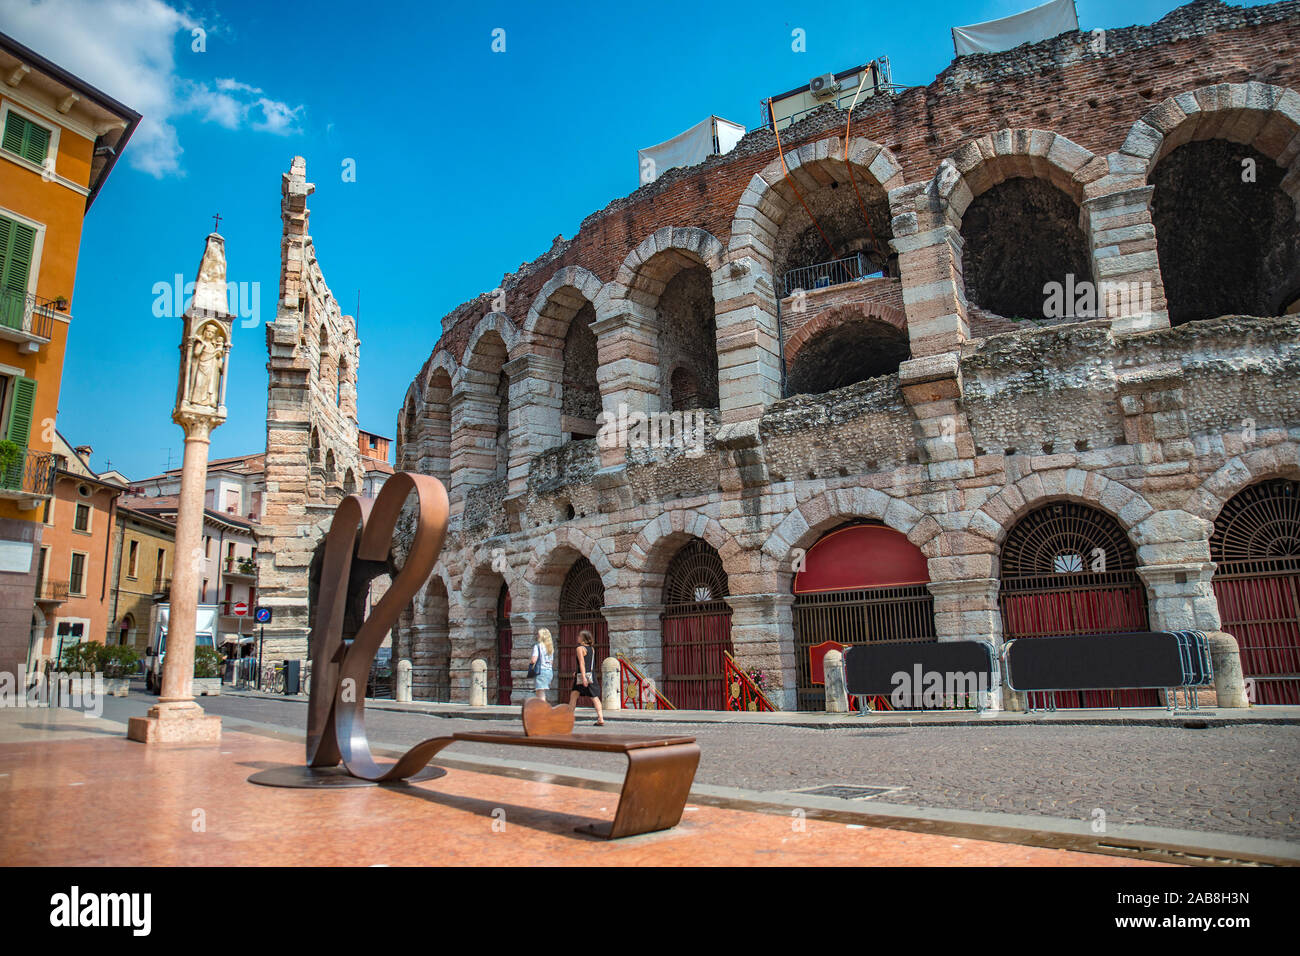 Verona town in north part of Italy Stock Photo